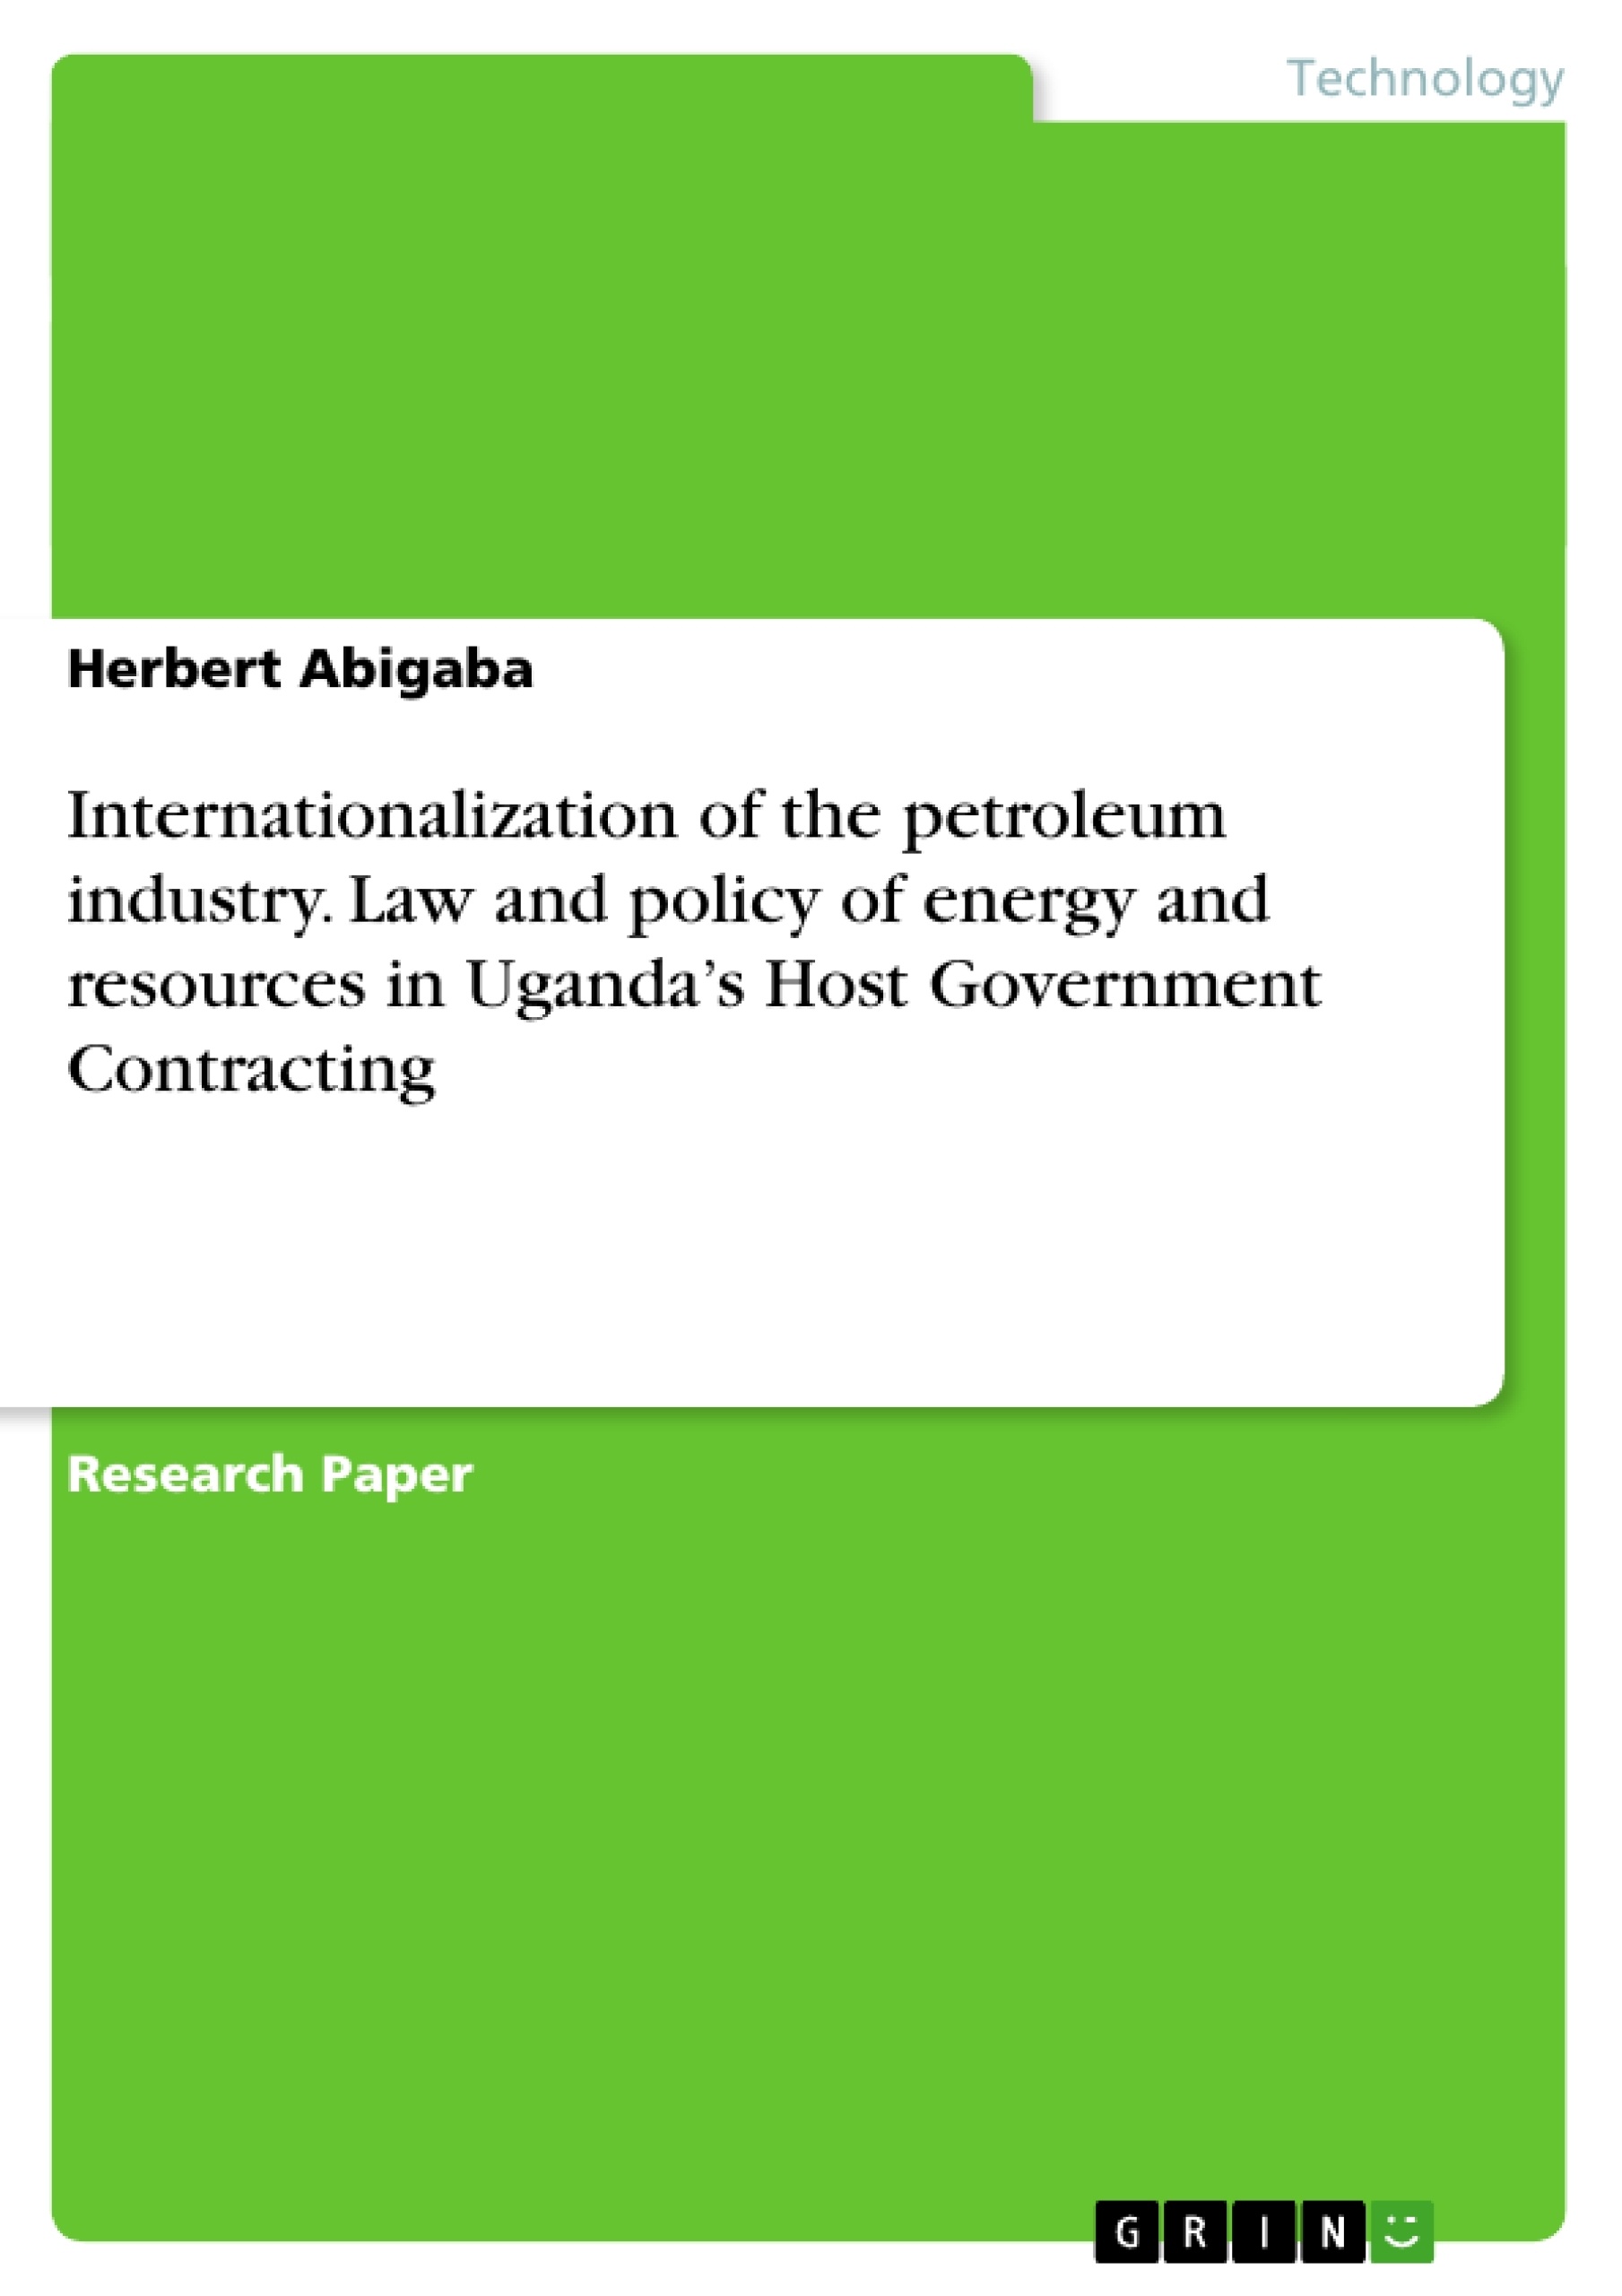 Titel: Internationalization of the petroleum industry. Law and policy of energy and resources in Uganda’s Host Government Contracting